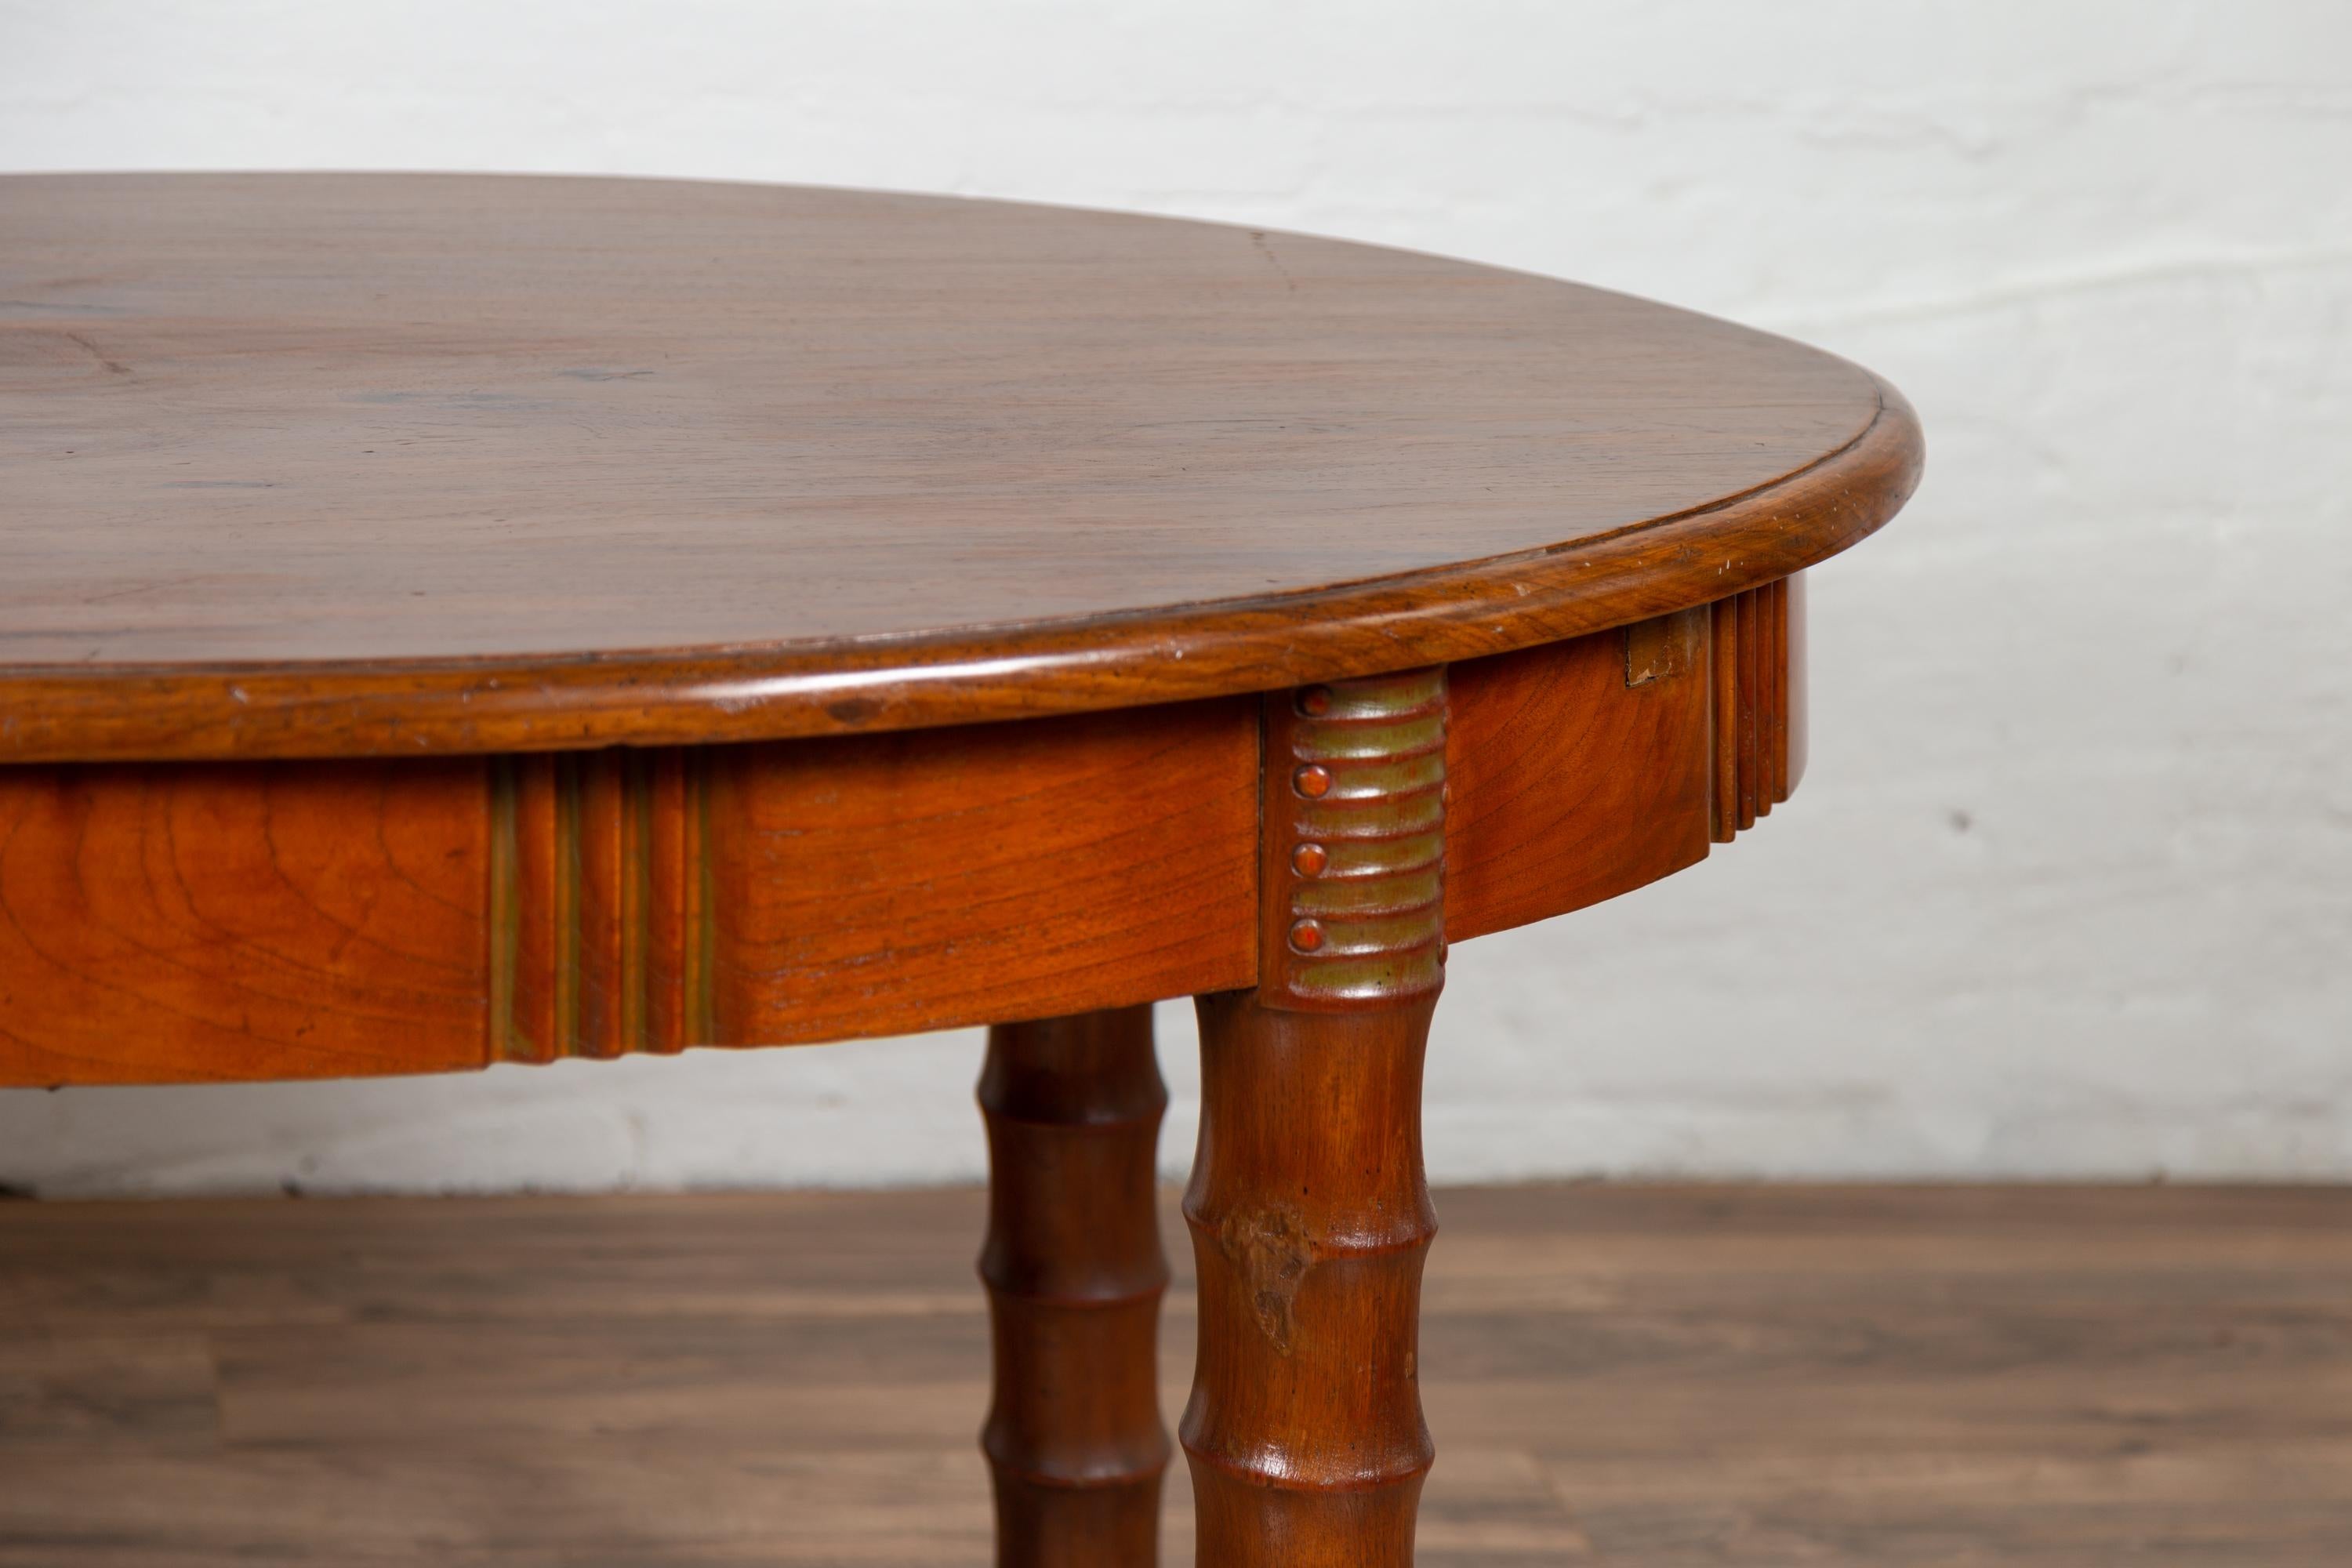 20th Century Antique Oval Dining Room Table from Indonesia with Spindle Legs and Warm Patina For Sale